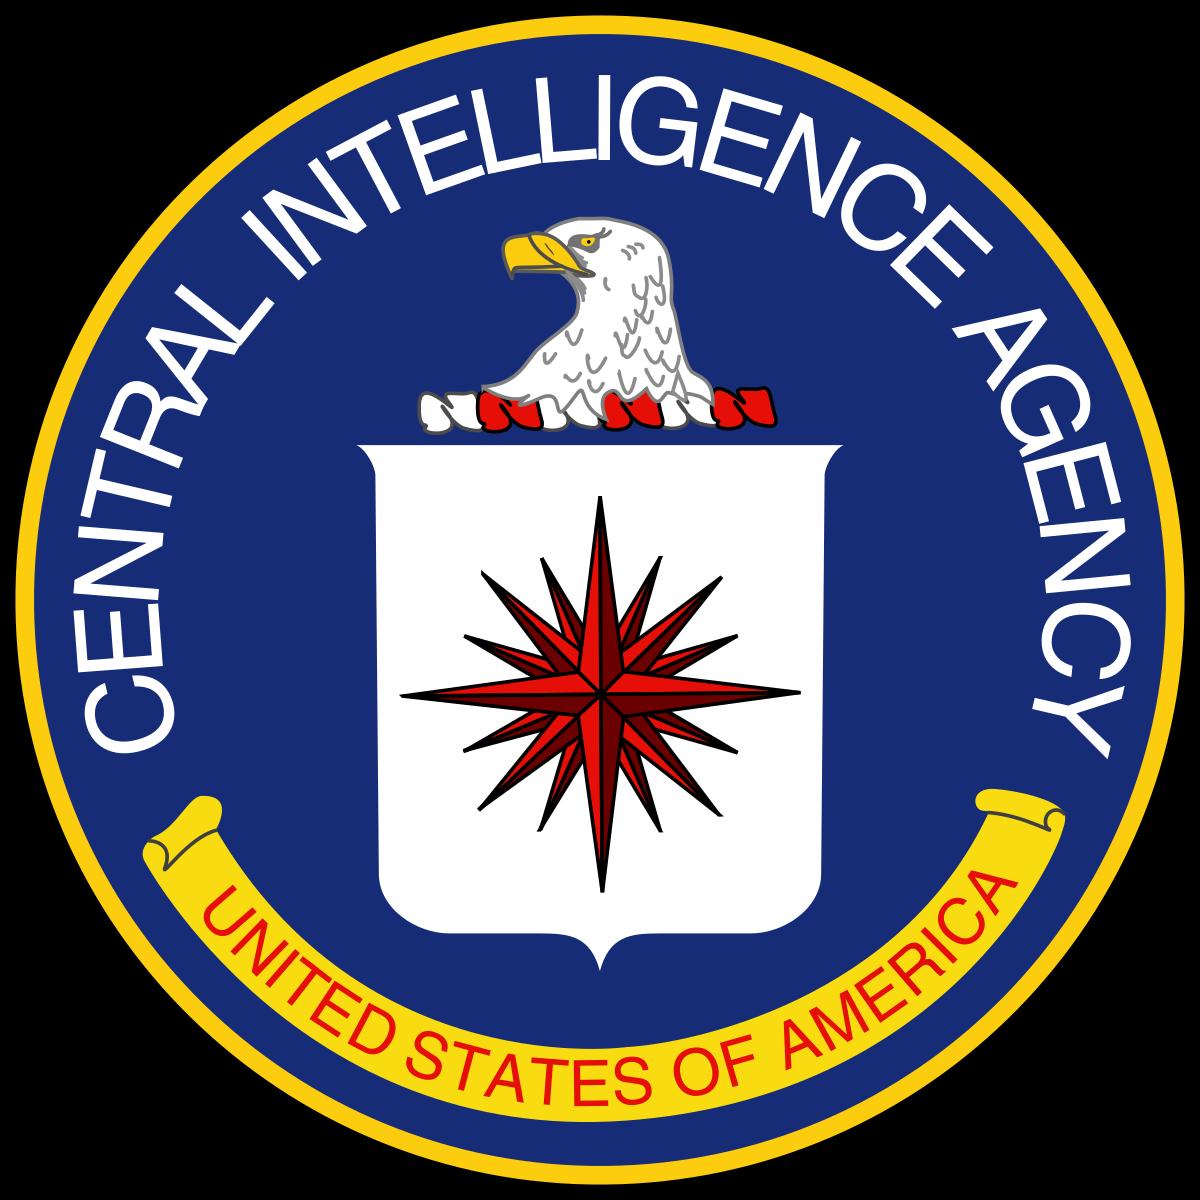 Seal_of_the_Central_Intelligence_Agency.svg.png.jpg